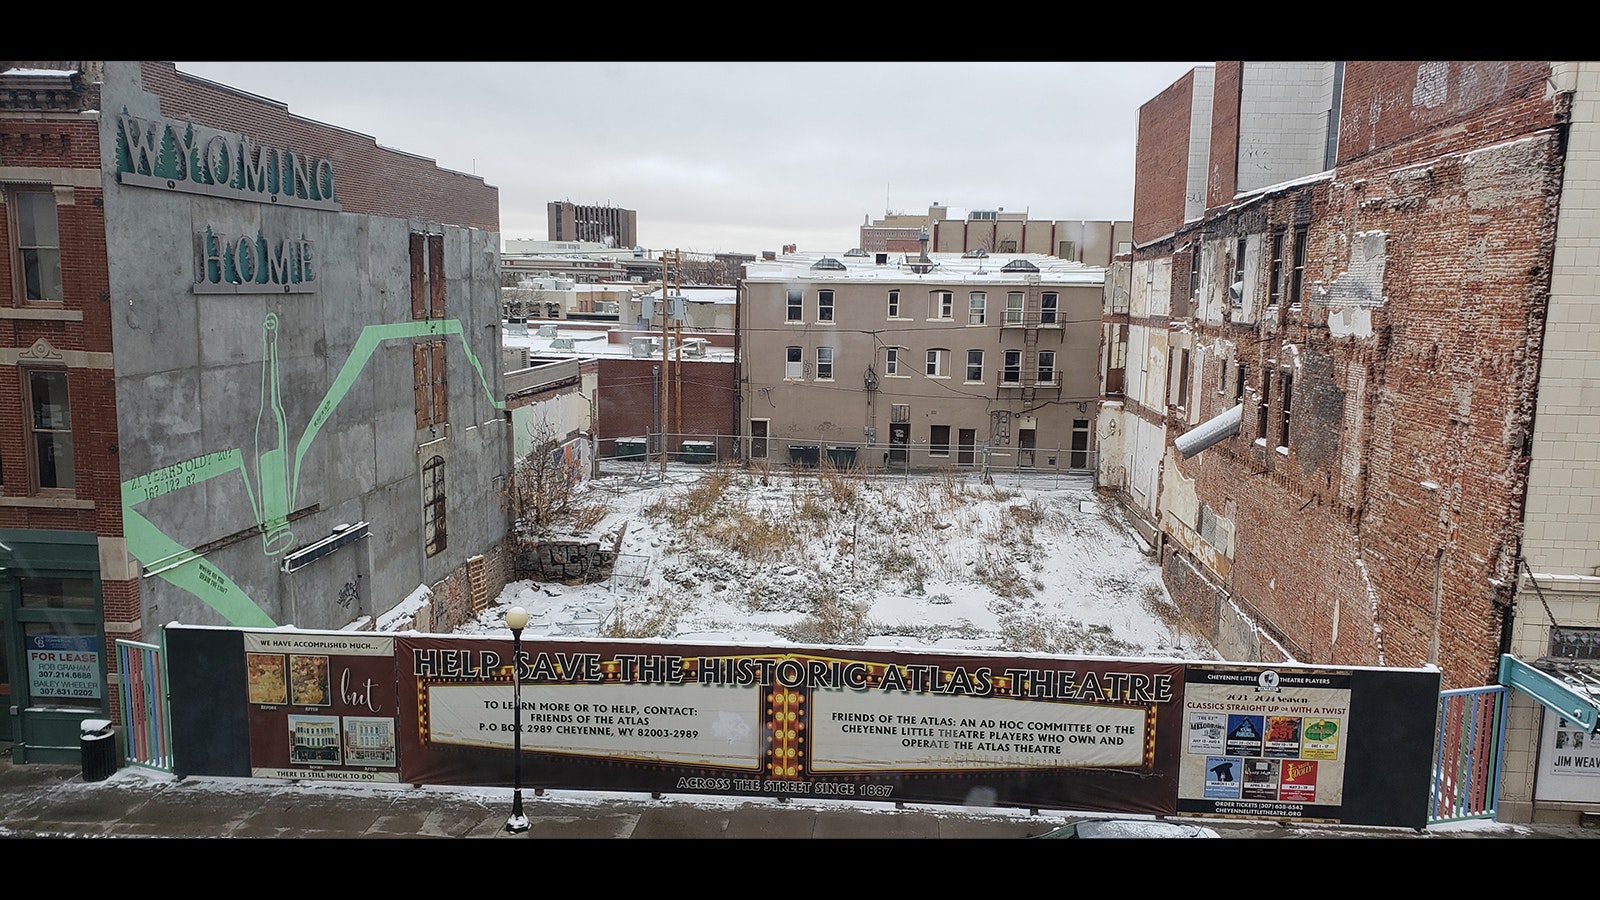 A view into "The Hole" across the street from the Atlas Theatre in downtown Cheyenne, which used to be a bakery that burnt up. Now it's cordoned off by a fence calling attention to the effort to restore the Atlas.